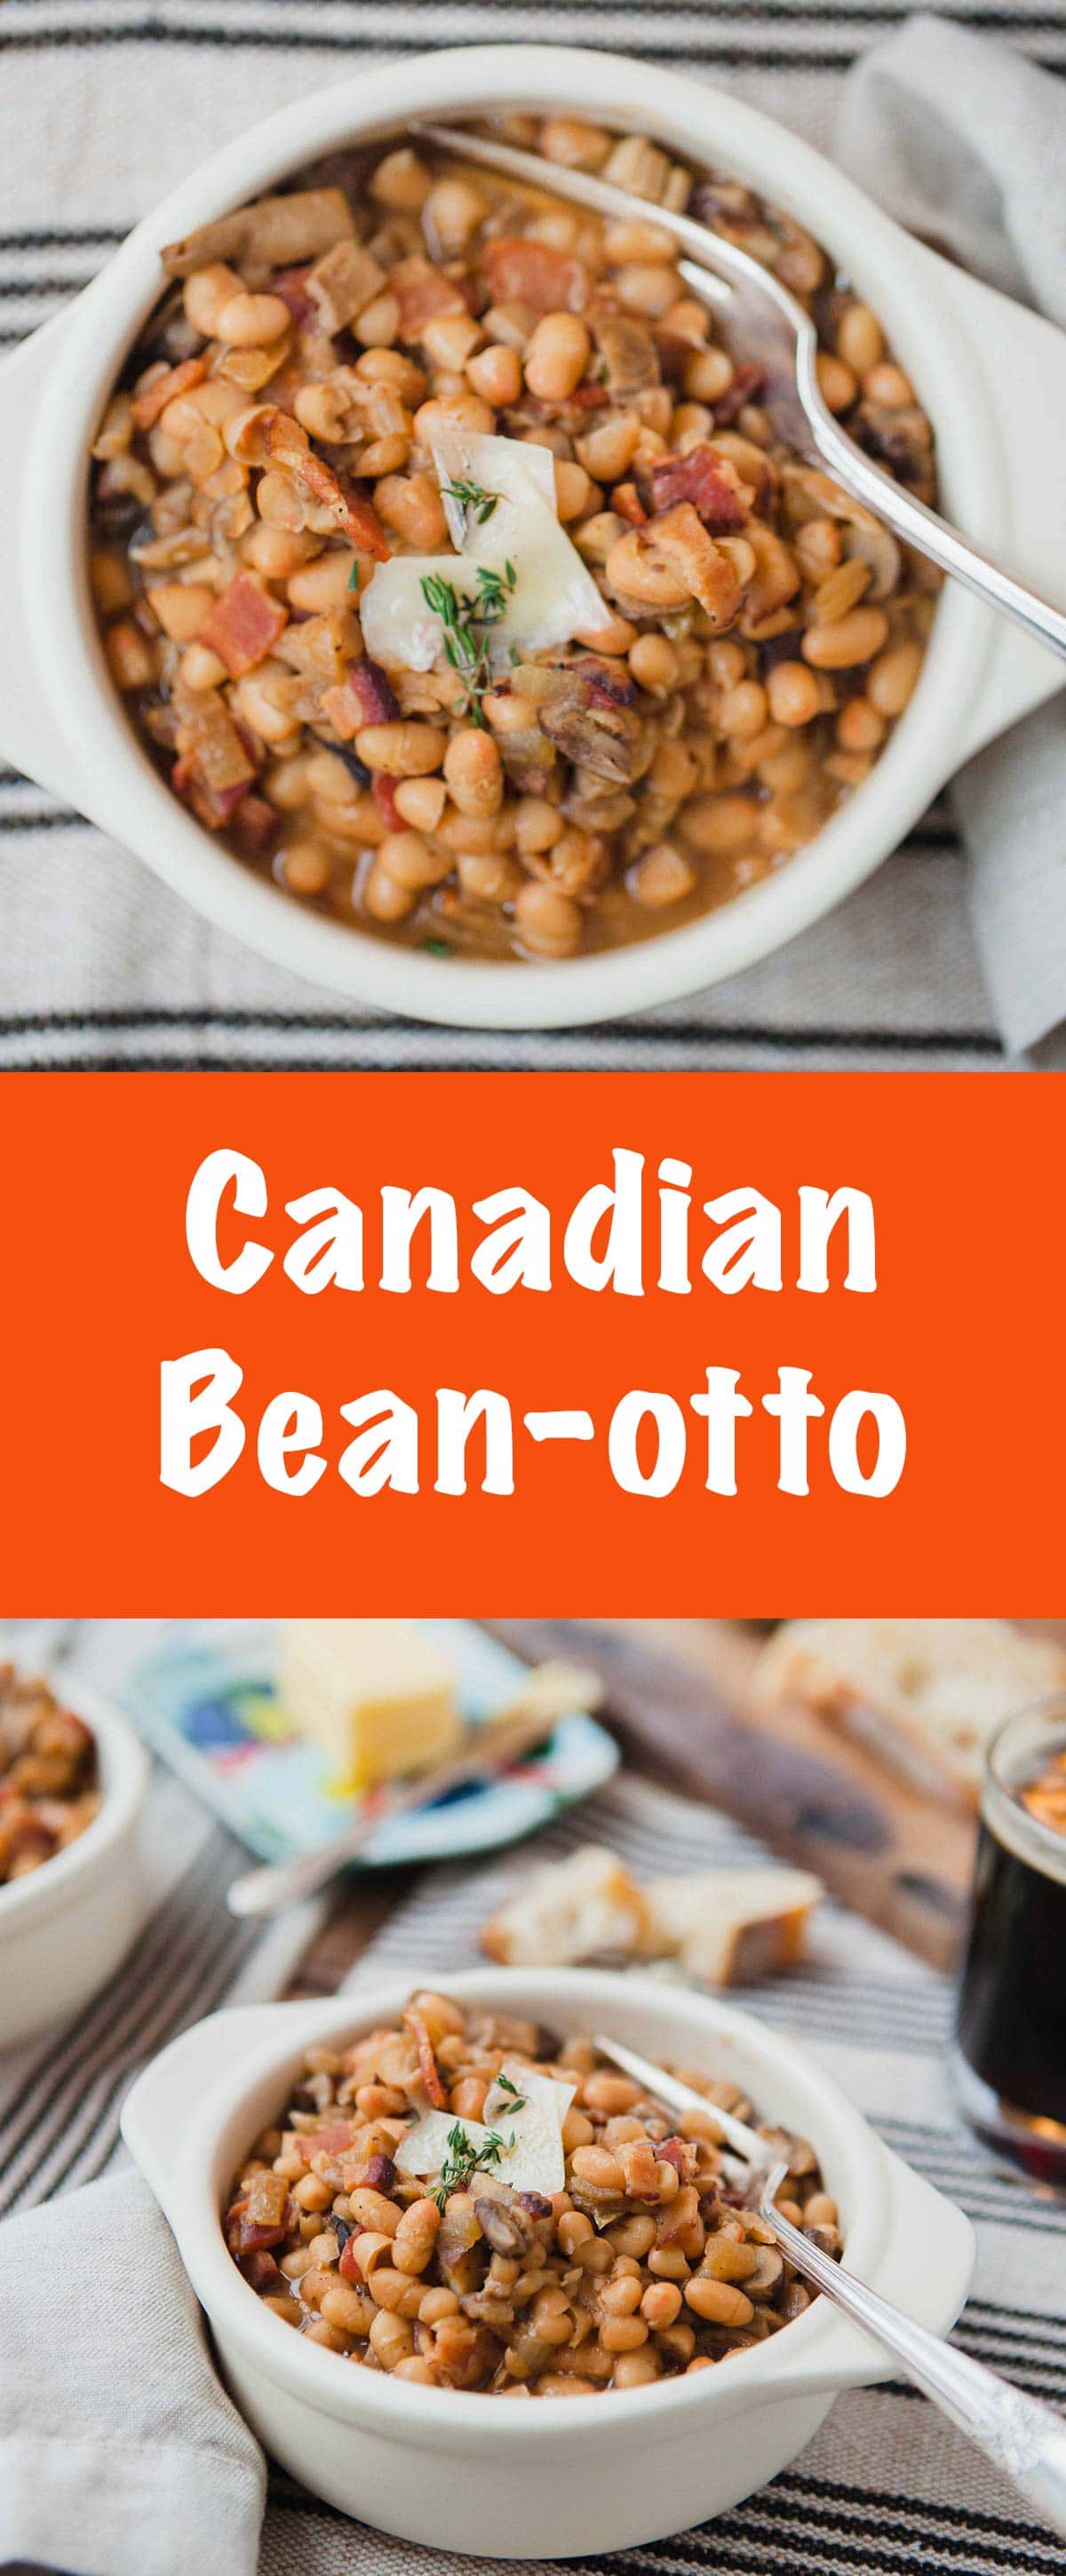 Canadian Bean-otto is a quick and easy one pot meal featuring beans, beer, cheese and mushrooms!